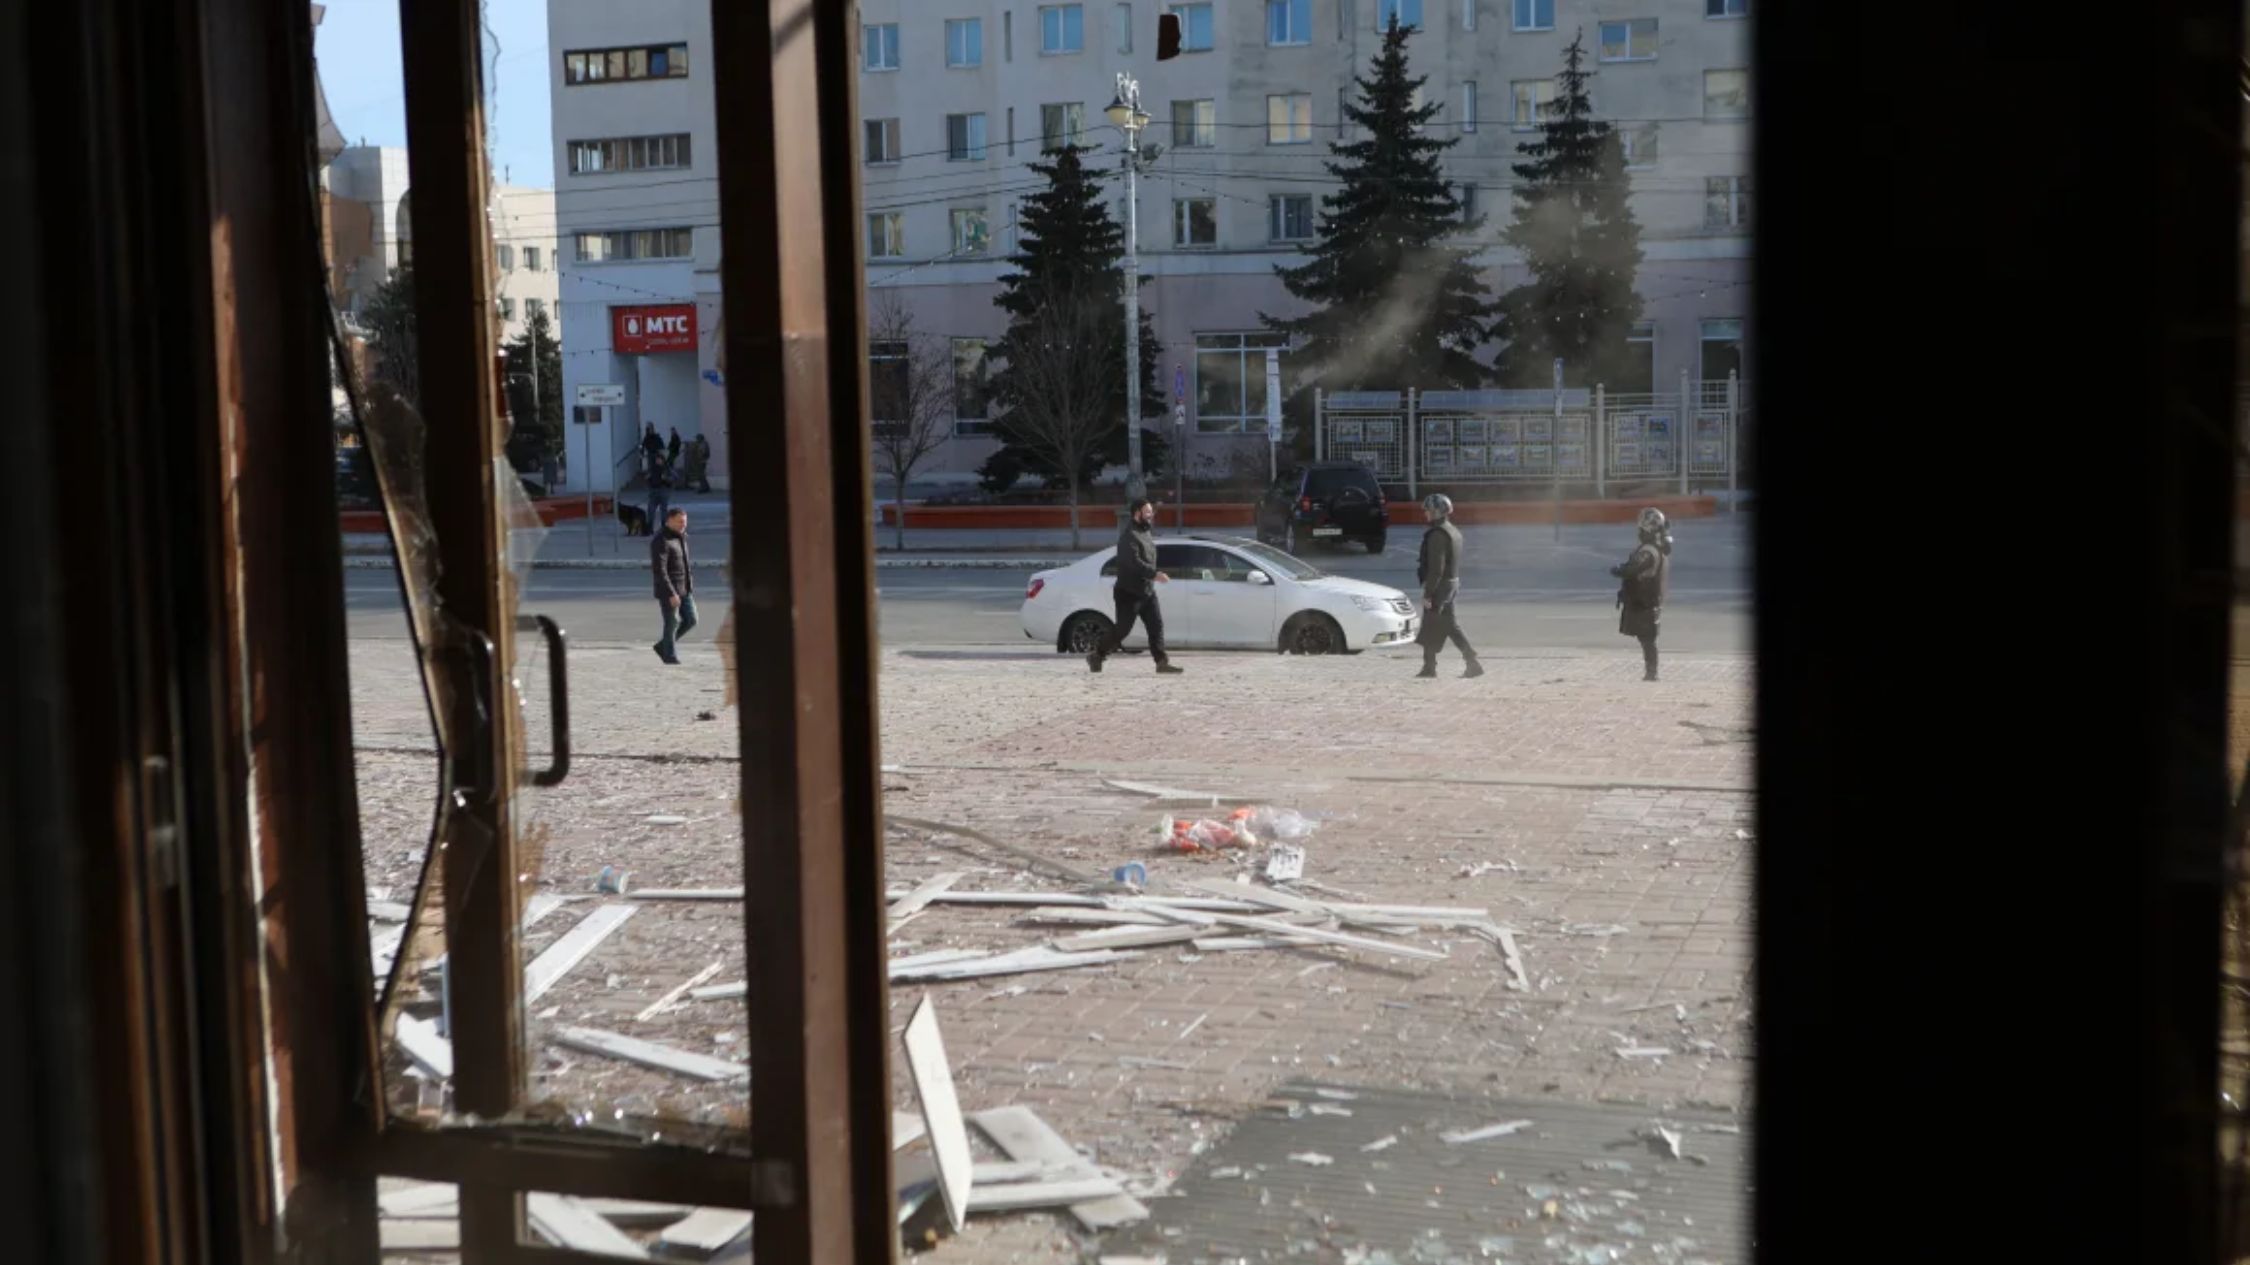 Belgorod City Hall was damaged after drone attacks on the city on Tuesday.  (Credit: Stringer/AFP/Getty Images)